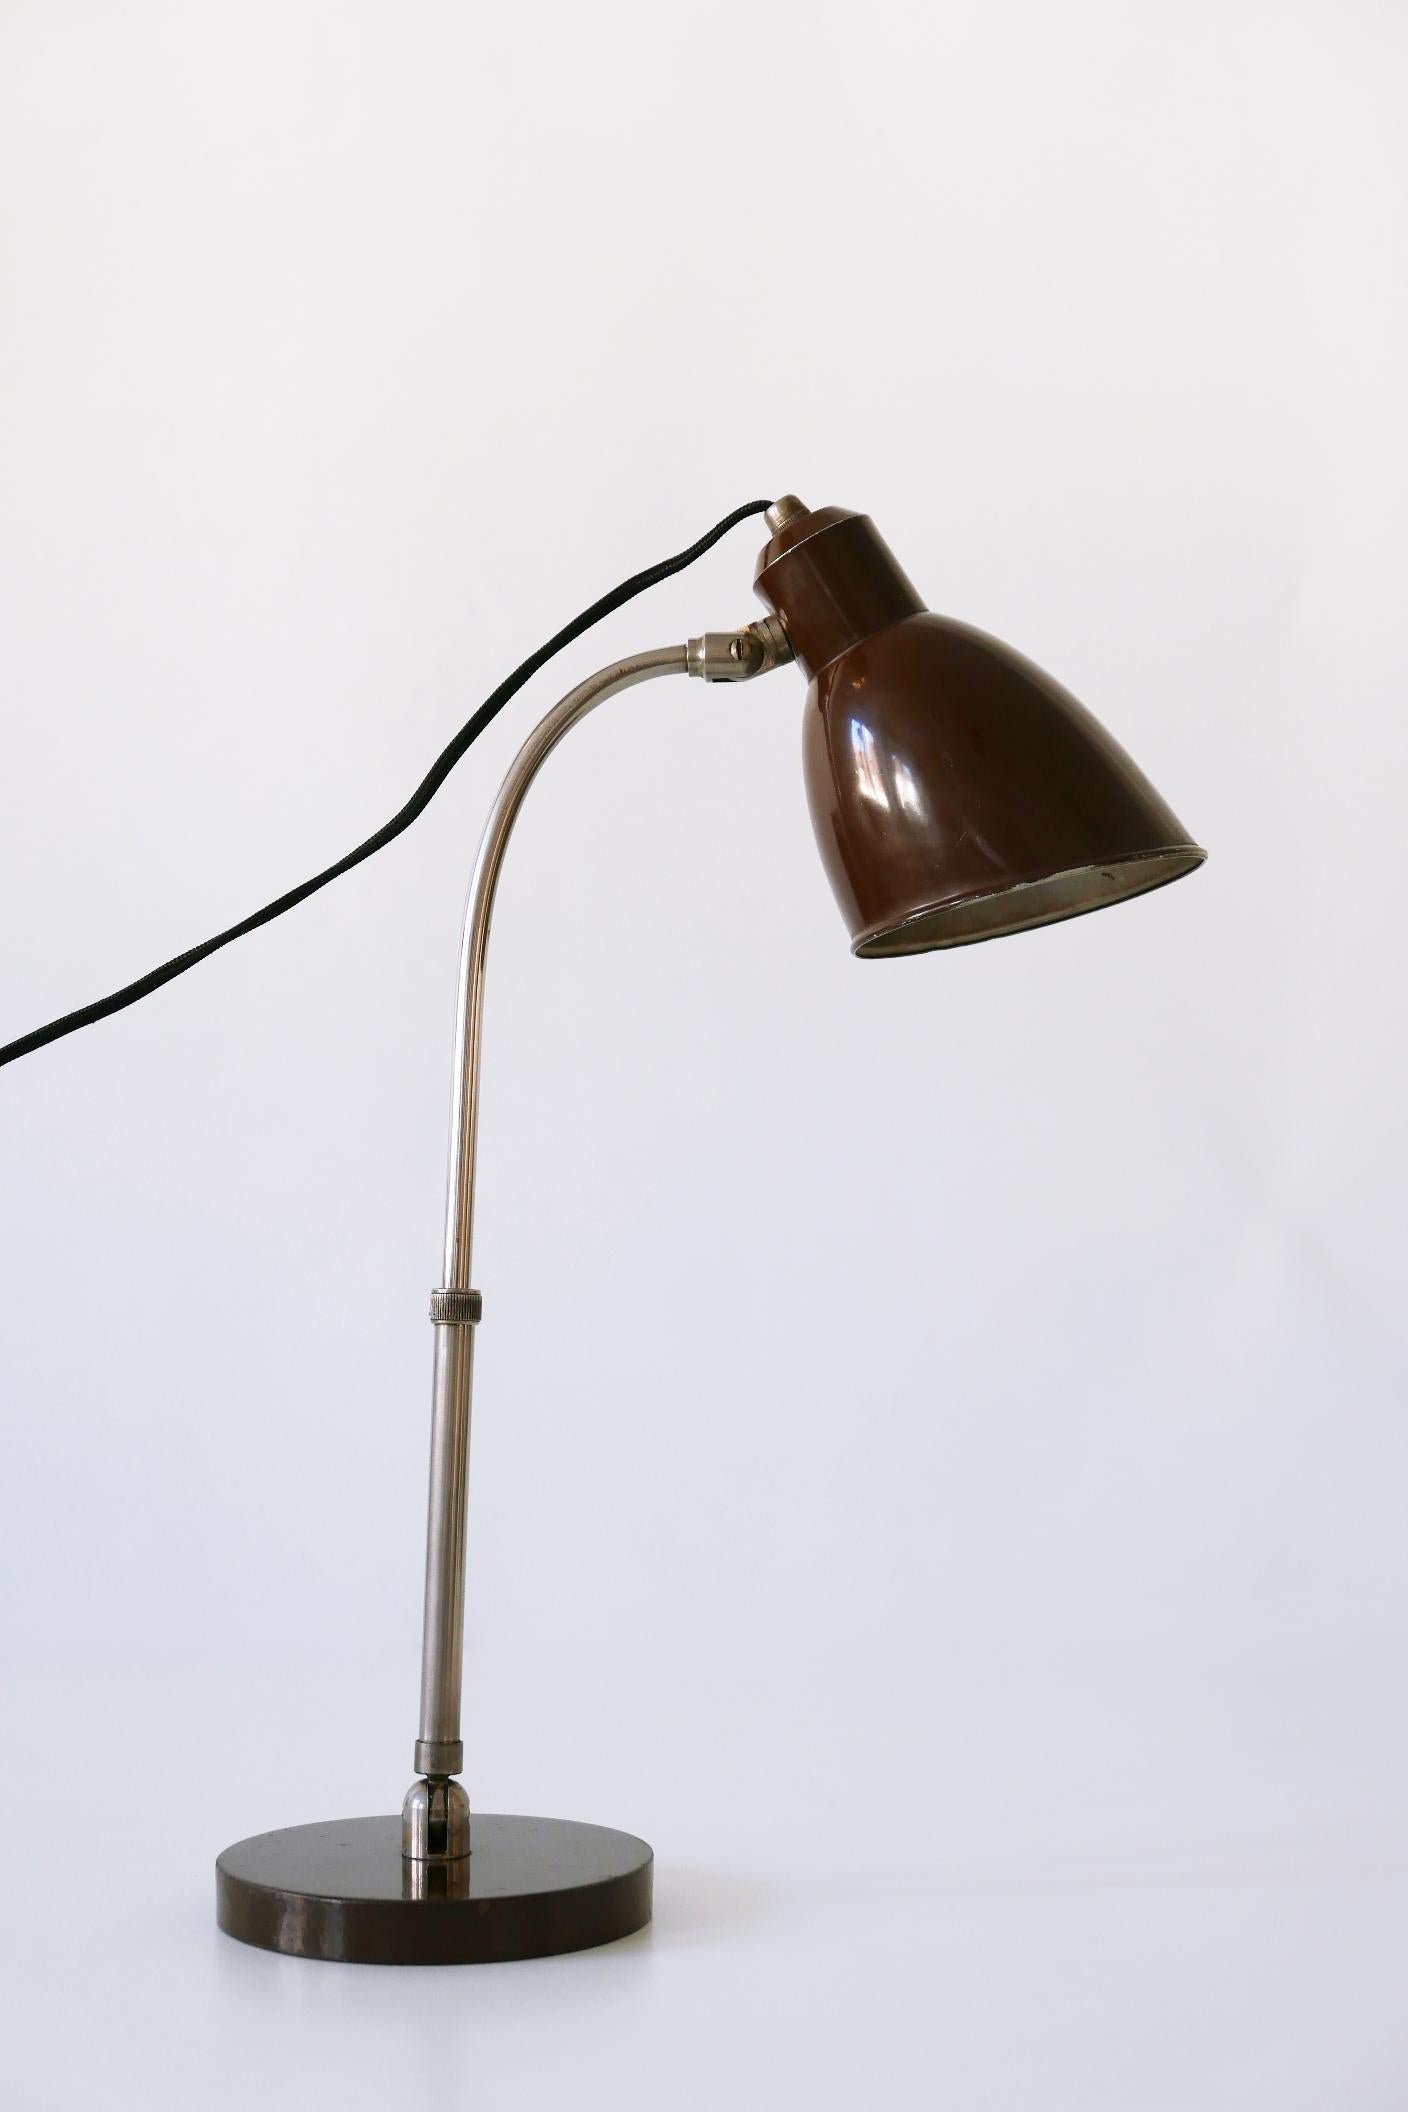 Cast Rare Bauhaus Table Lamp 'Piccolo' by Christian Dell for Bünte & Remmler, 1930s For Sale